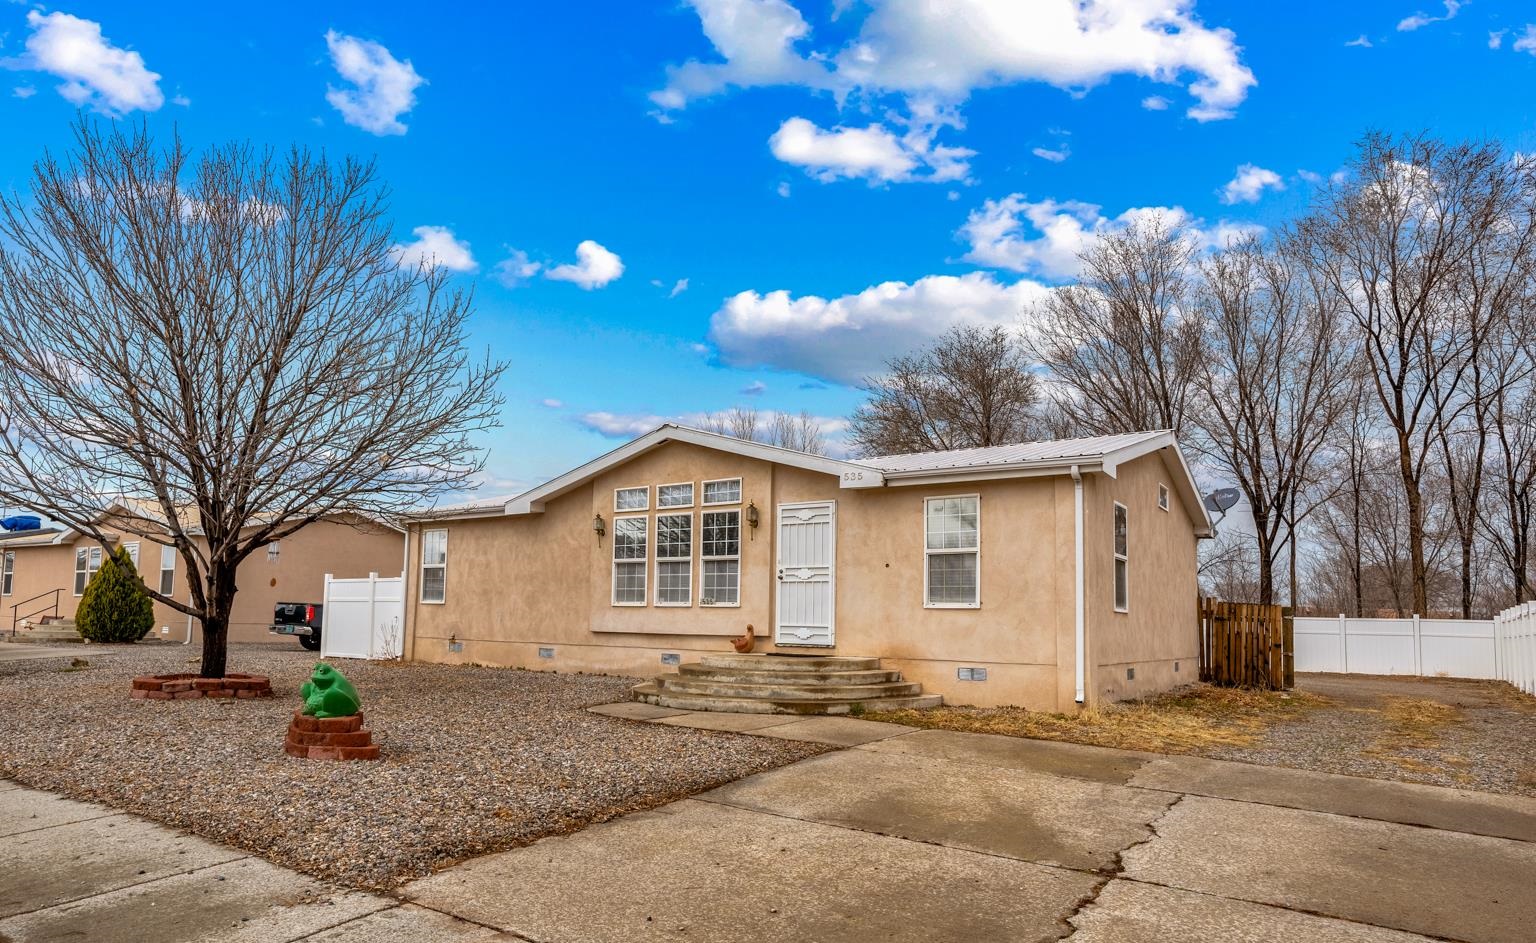 535 Calle Don Leandro, Espanola, New Mexico 87532, 3 Bedrooms Bedrooms, ,2 BathroomsBathrooms,Residential,For Sale,535 Calle Don Leandro,202200847